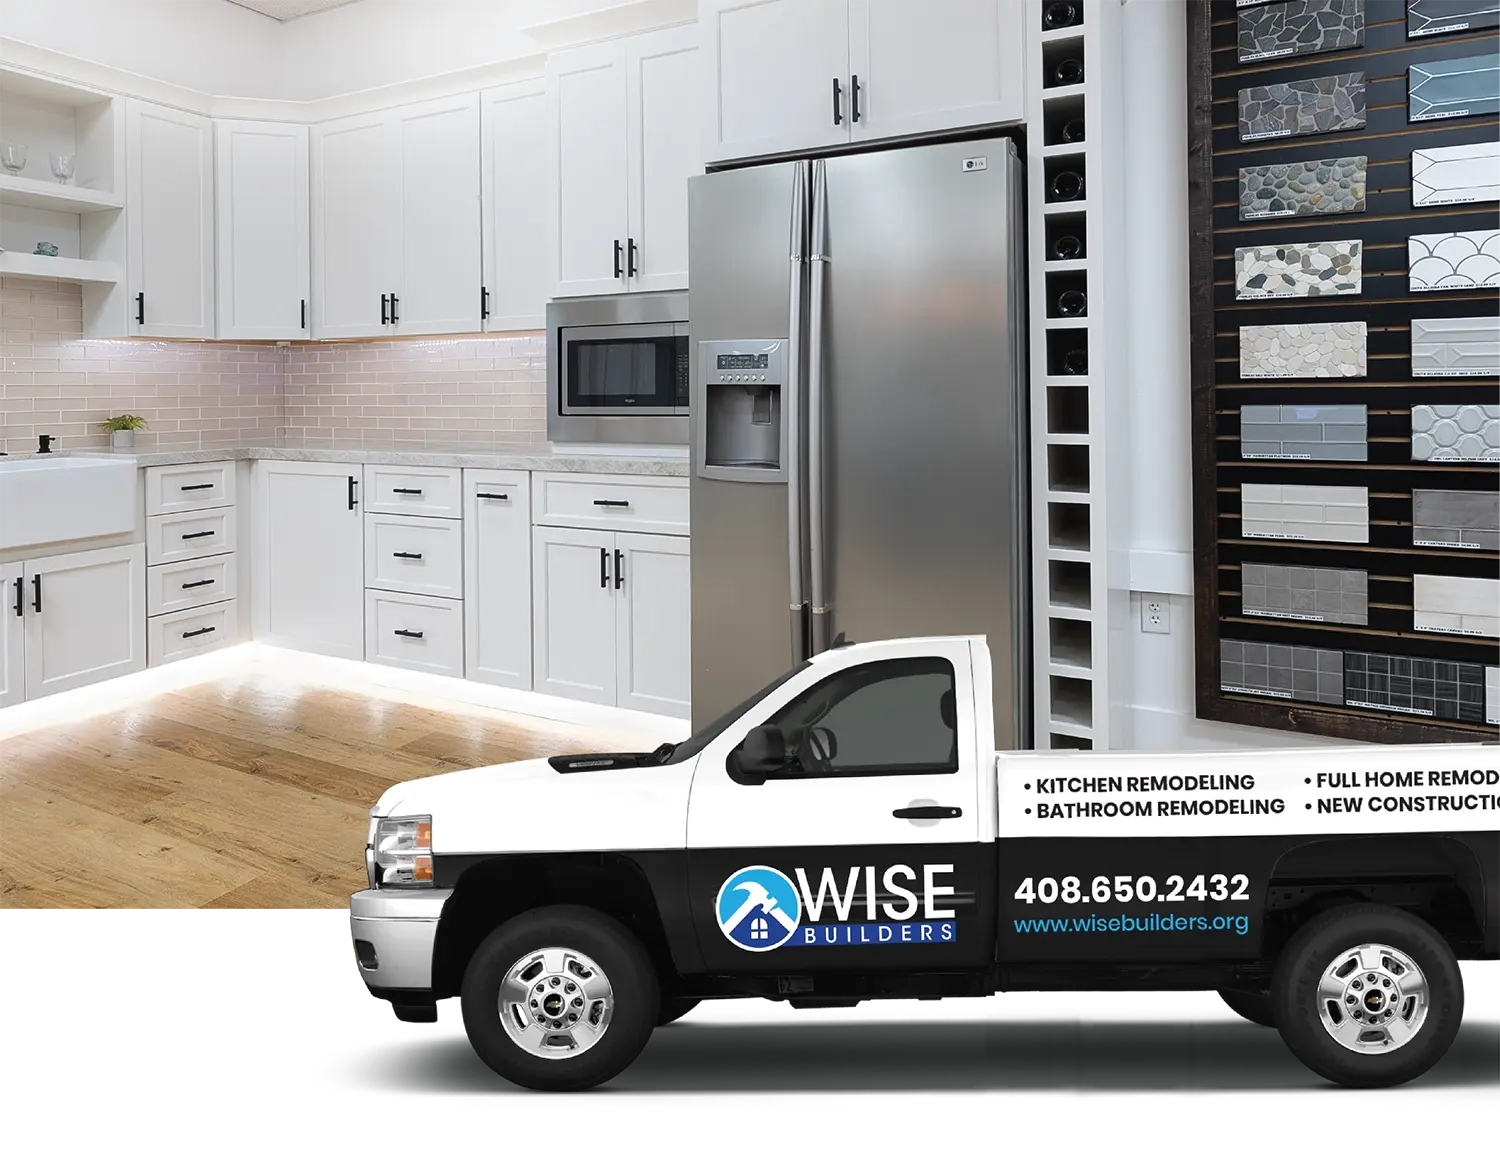 Wise Builders services page with a kitchen sample from the showroom and the company truck